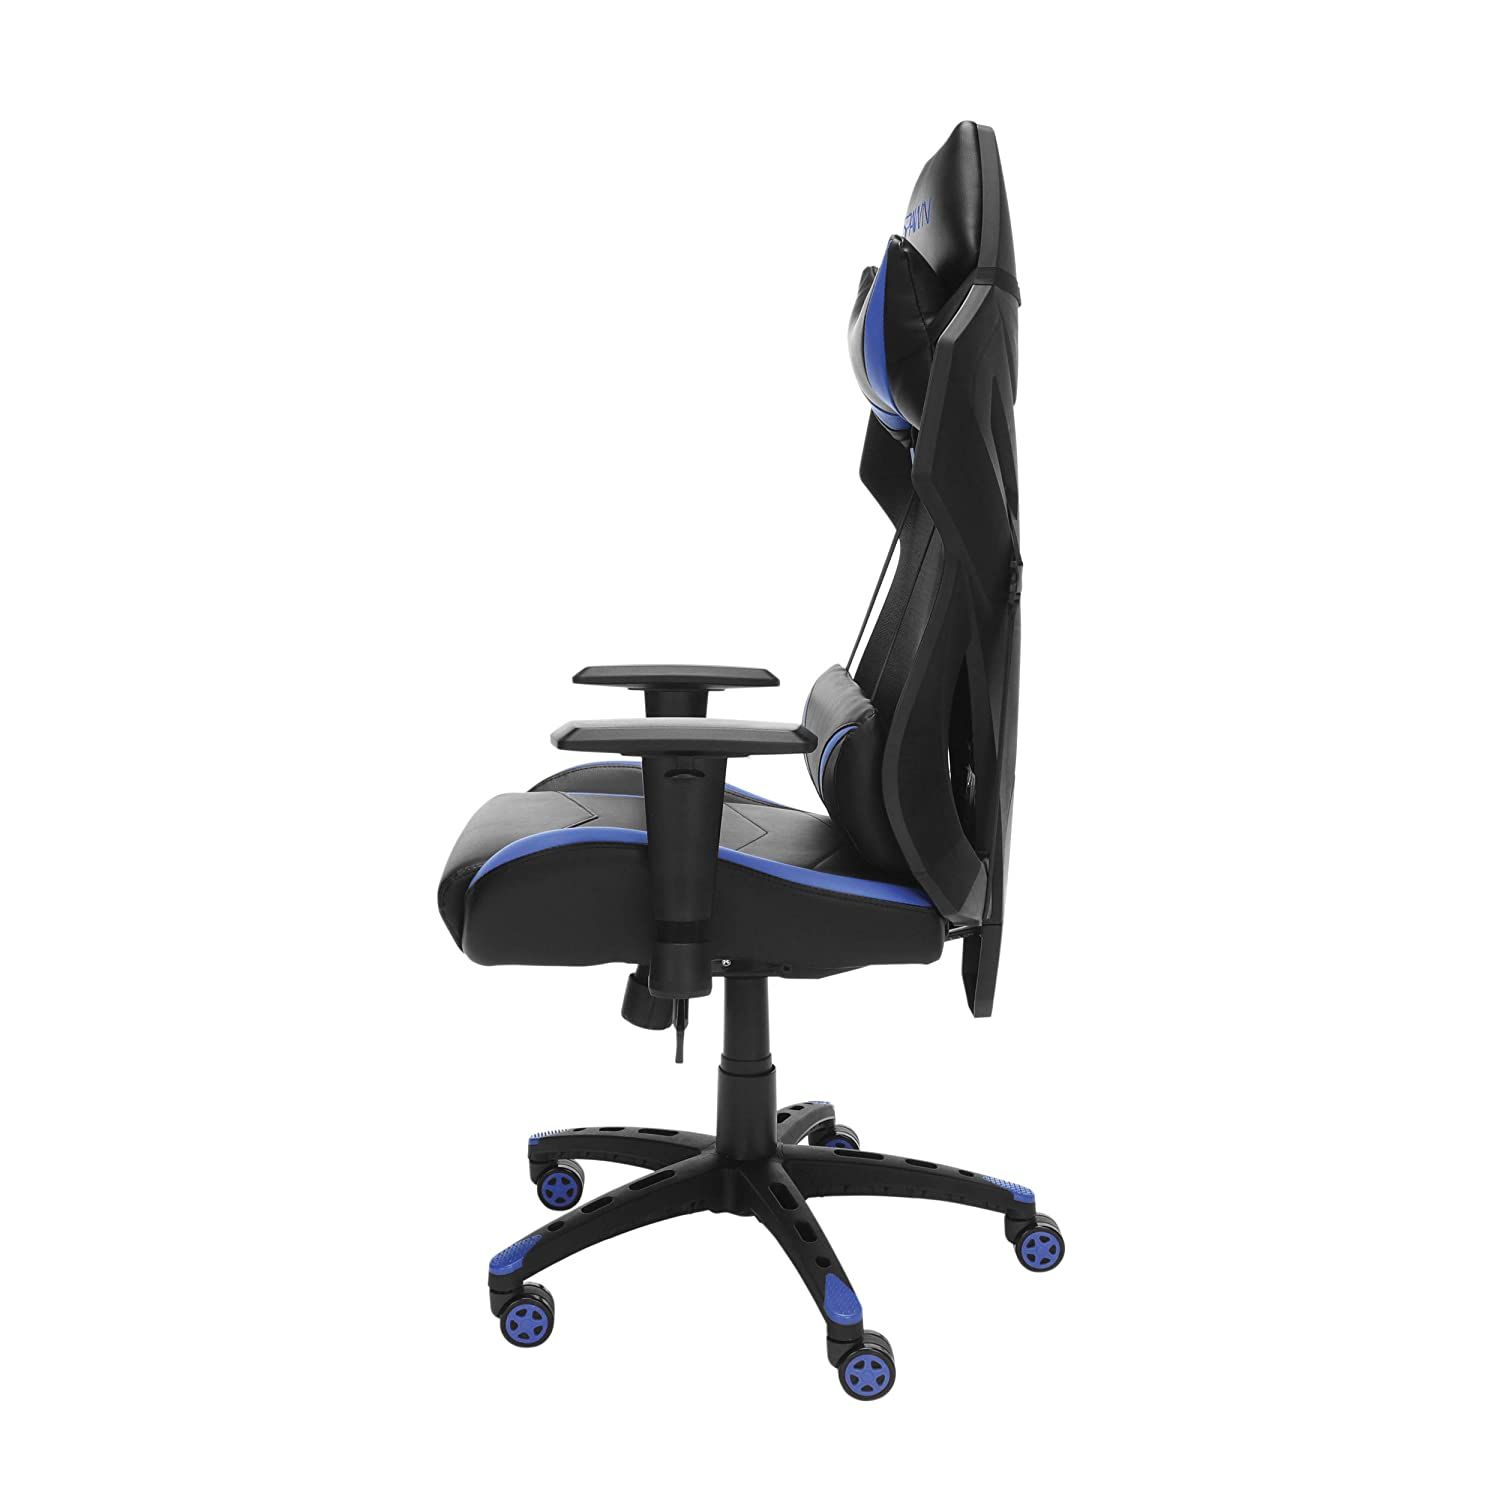 Respawn 205 Gaming Chair side view